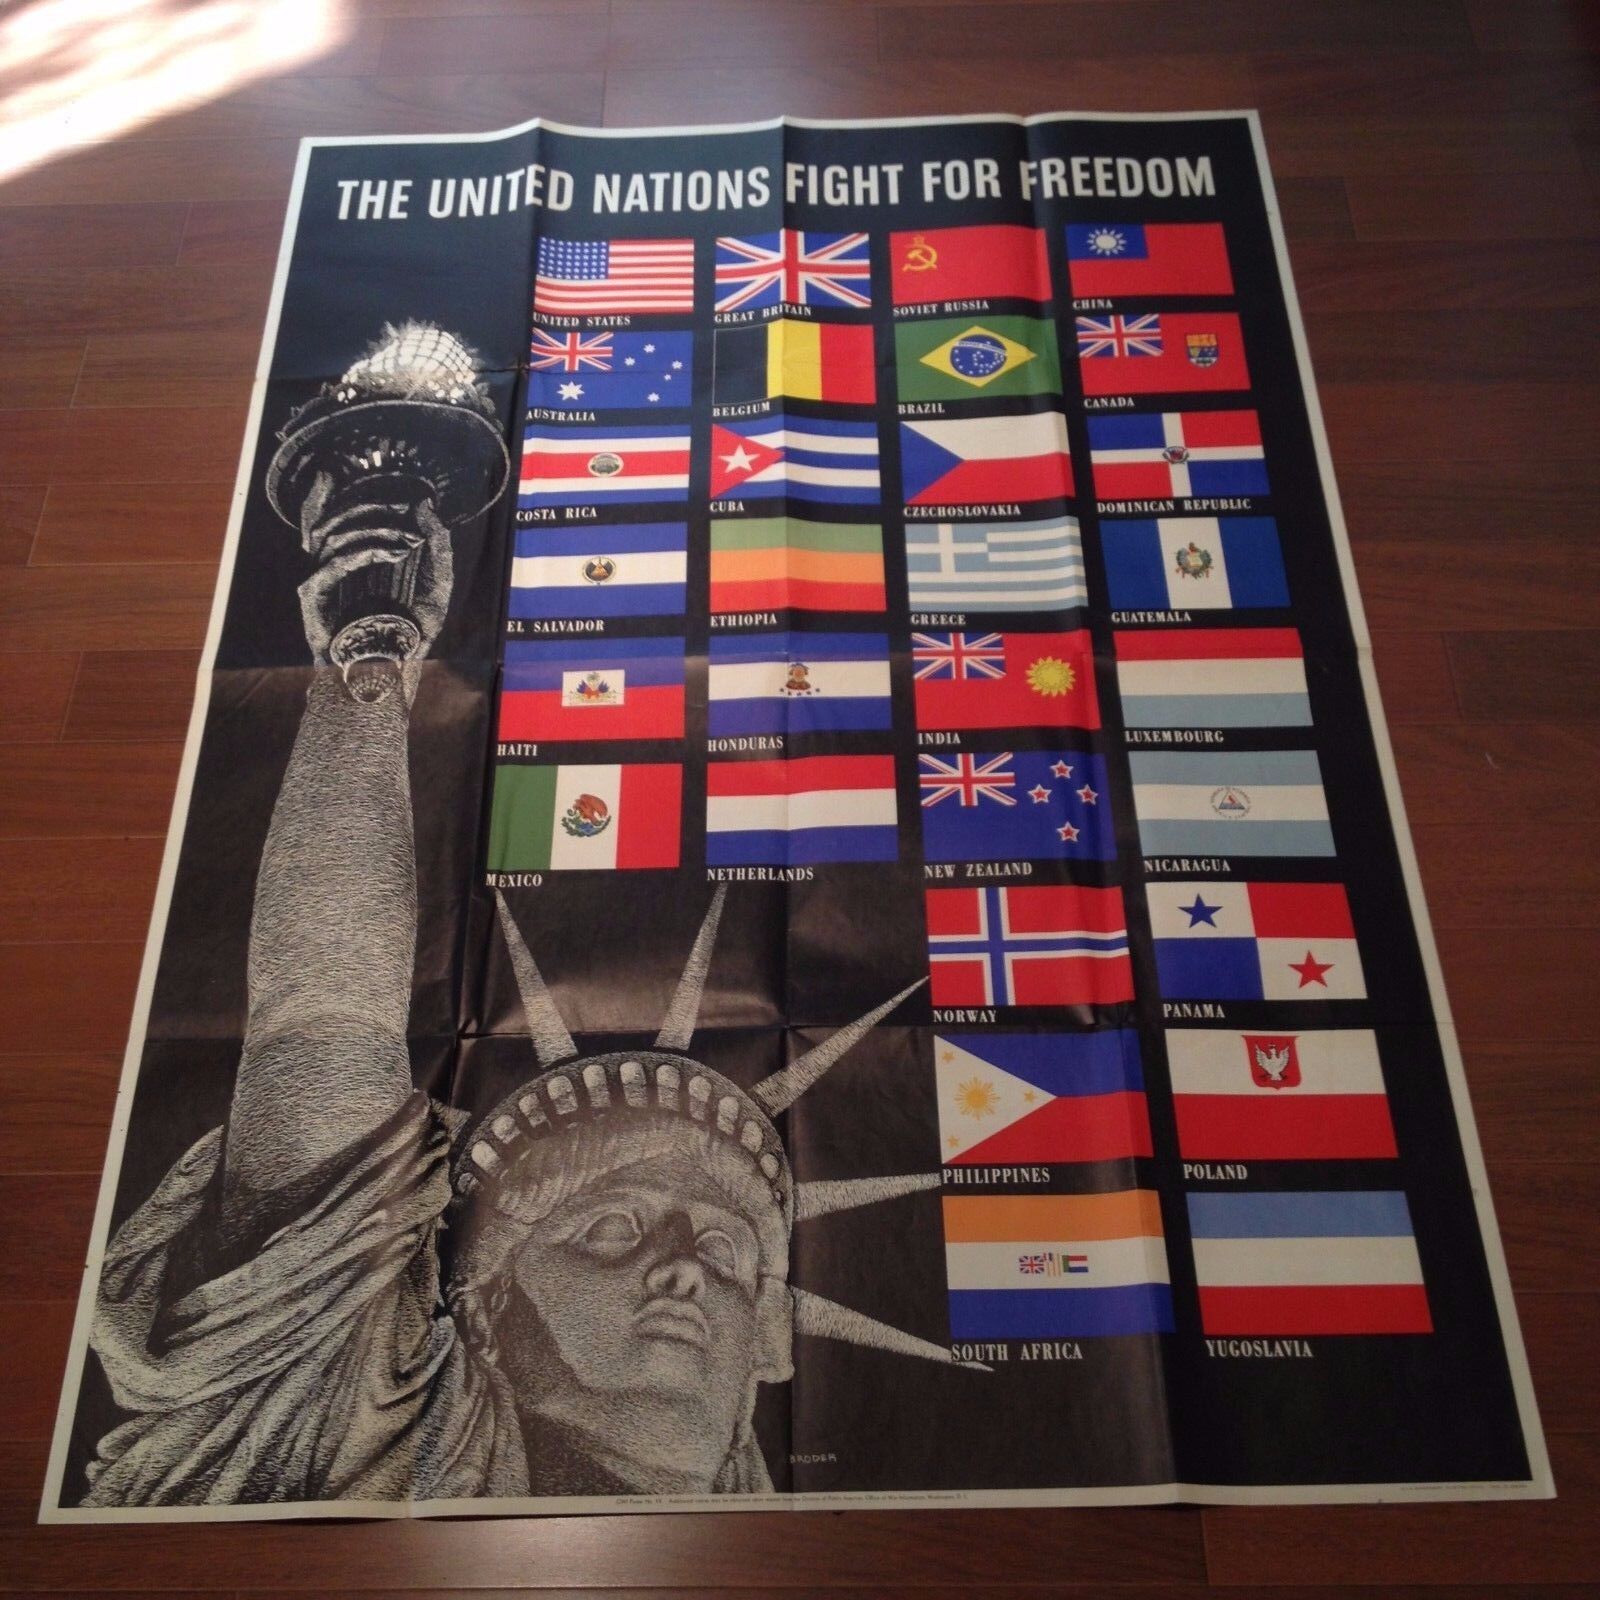 The United Nations Fight For Freedom (Original WWII Poster)